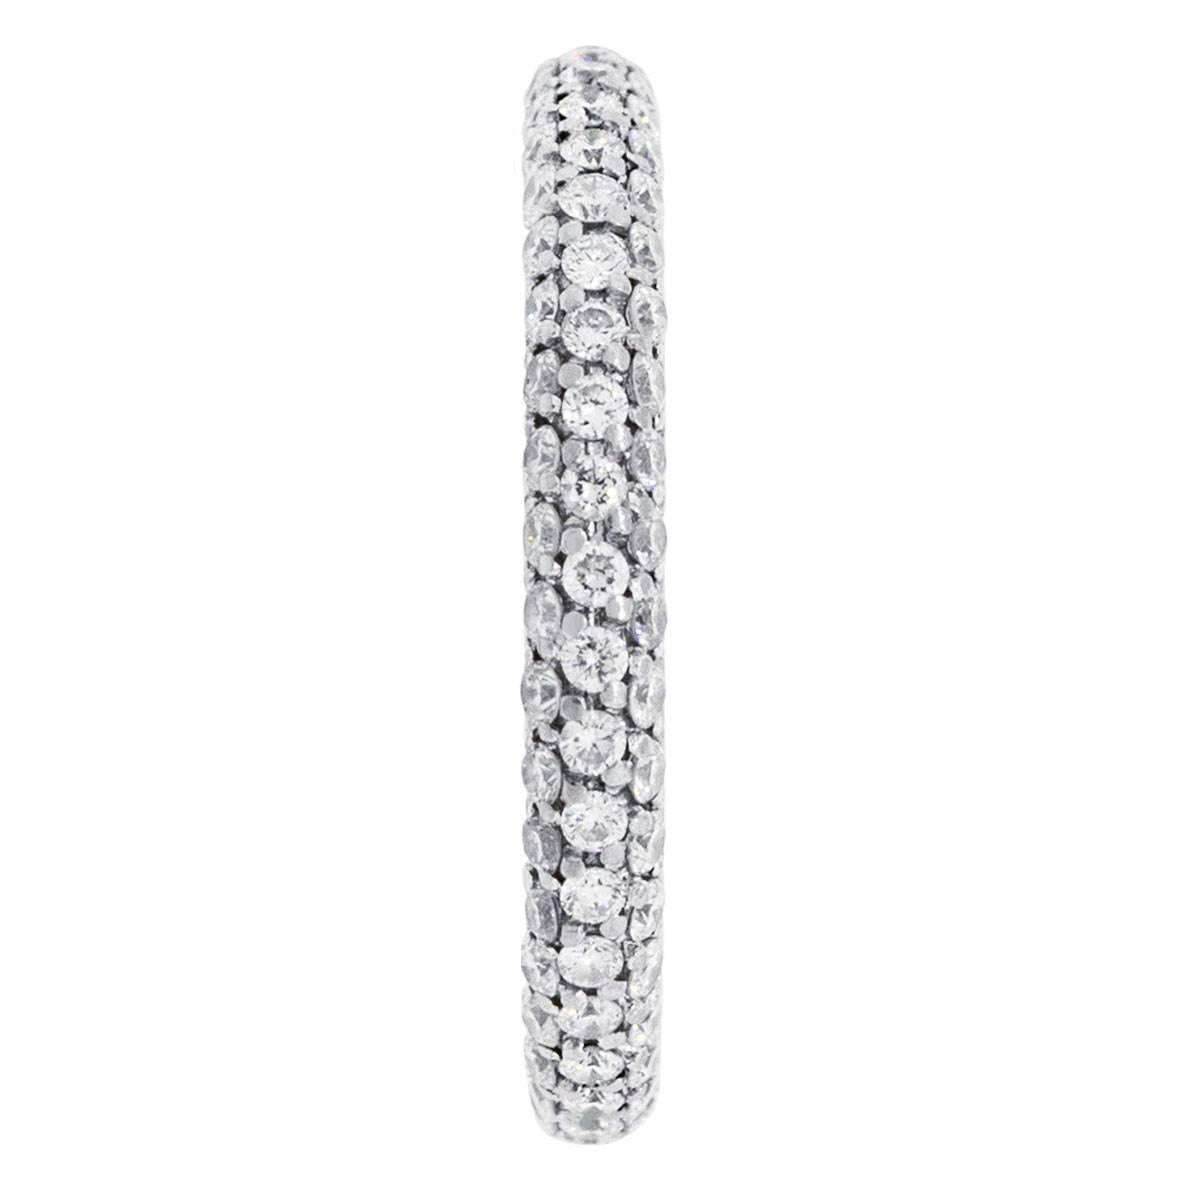 Brand: De Beers
Material: 18k white gold
Diamond Details: Approximately 1.10ctw of round brilliant diamonds. Diamonds are G in color and VS in clarity.
Size: 8
Total Weight: 3.0g (1.9dwt)
Measurements: 0.90″ x 0.15″ x 0.90″
Additional Details: This